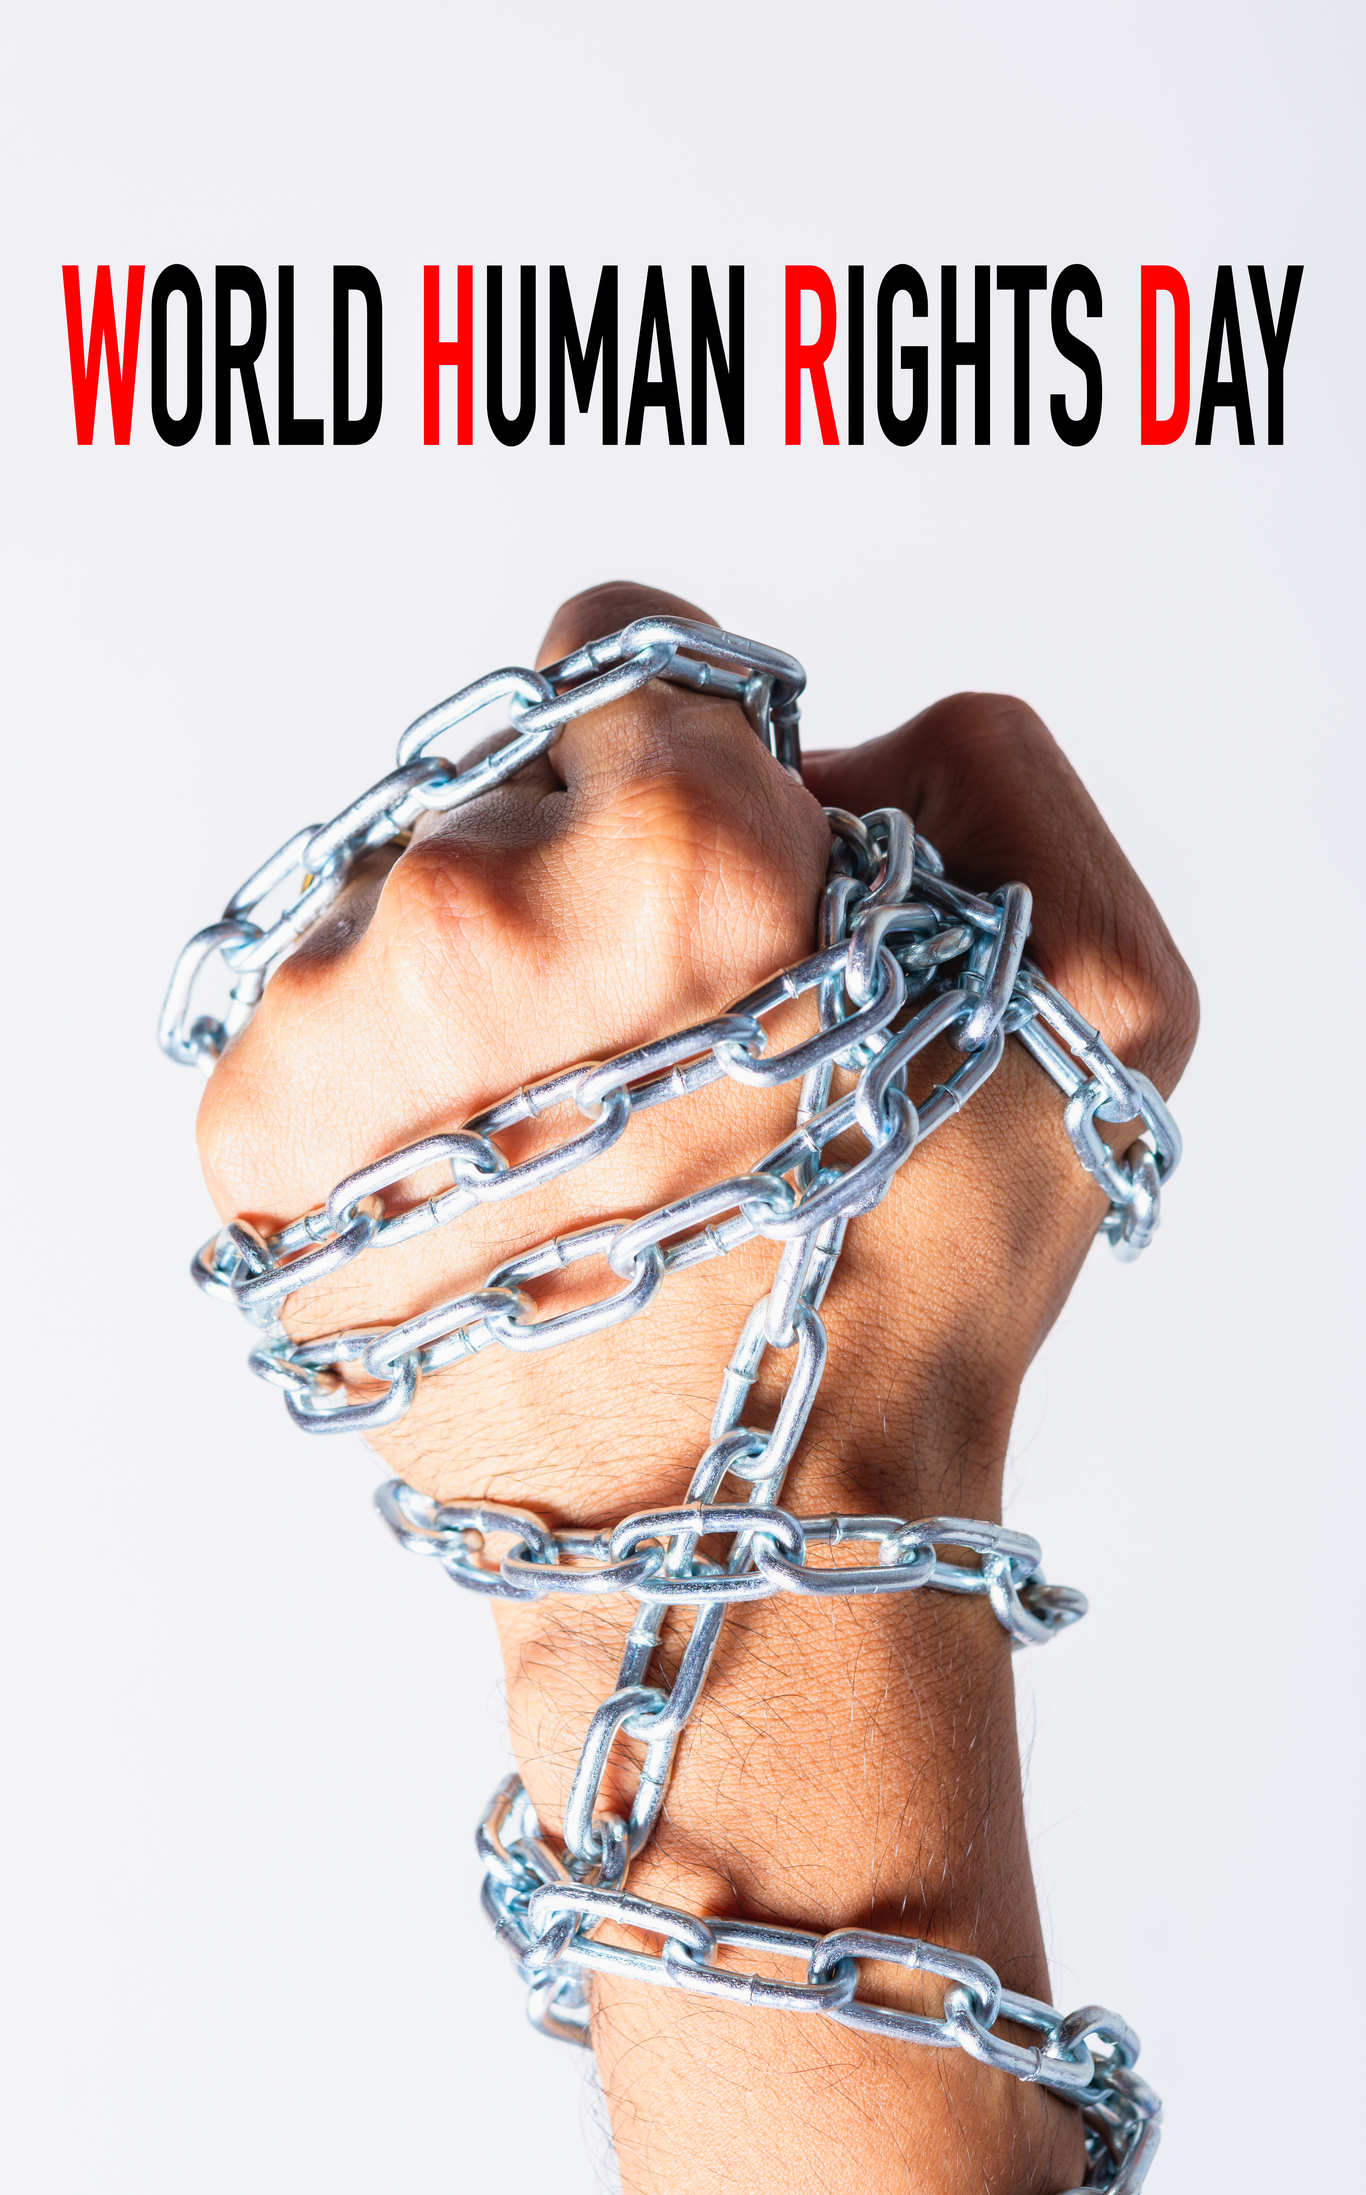 Cropped Hand Of Man Wrapped In Chain With World Human Rights Day Text Against White Background